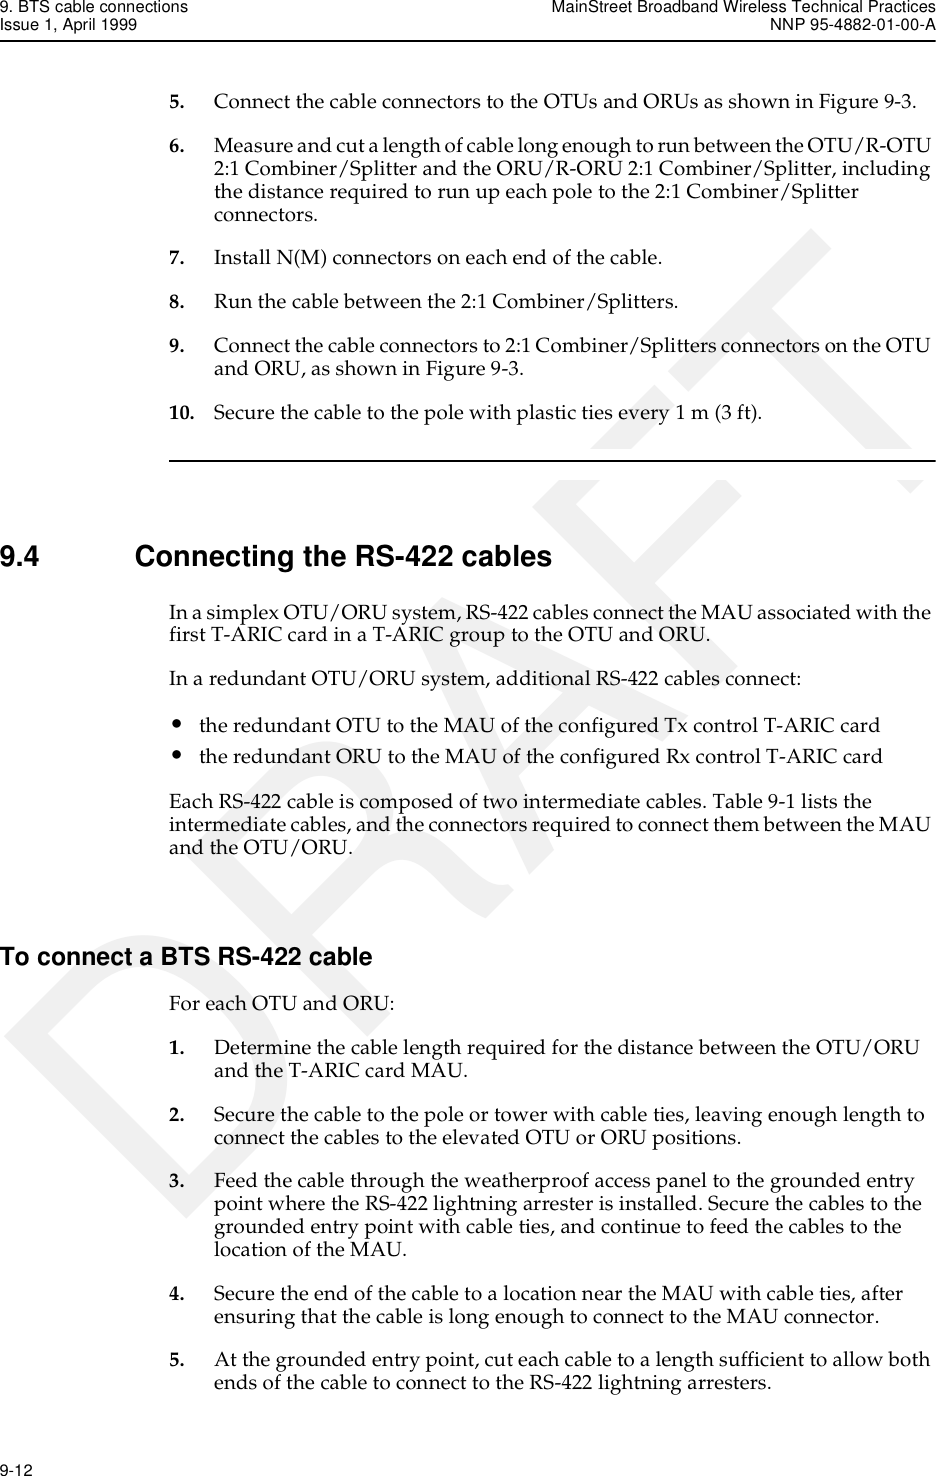 9. BTS cable connections MainStreet Broadband Wireless Technical PracticesIssue 1, April 1999 NNP 95-4882-01-00-A9-12   DRAFT5. Connect the cable connectors to the OTUs and ORUs as shown in Figure 9-3.6. Measure and cut a length of cable long enough to run between the OTU/R-OTU 2:1 Combiner/Splitter and the ORU/R-ORU 2:1 Combiner/Splitter, including the distance required to run up each pole to the 2:1 Combiner/Splitter connectors.7. Install N(M) connectors on each end of the cable.8. Run the cable between the 2:1 Combiner/Splitters.9. Connect the cable connectors to 2:1 Combiner/Splitters connectors on the OTU and ORU, as shown in Figure 9-3.10. Secure the cable to the pole with plastic ties every 1 m (3 ft).9.4 Connecting the RS-422 cablesIn a simplex OTU/ORU system, RS-422 cables connect the MAU associated with the first T-ARIC card in a T-ARIC group to the OTU and ORU. In a redundant OTU/ORU system, additional RS-422 cables connect:•the redundant OTU to the MAU of the configured Tx control T-ARIC card•the redundant ORU to the MAU of the configured Rx control T-ARIC cardEach RS-422 cable is composed of two intermediate cables. Table 9-1 lists the intermediate cables, and the connectors required to connect them between the MAU and the OTU/ORU.To connect a BTS RS-422 cableFor each OTU and ORU:1. Determine the cable length required for the distance between the OTU/ORU and the T-ARIC card MAU.2. Secure the cable to the pole or tower with cable ties, leaving enough length to connect the cables to the elevated OTU or ORU positions.3. Feed the cable through the weatherproof access panel to the grounded entry point where the RS-422 lightning arrester is installed. Secure the cables to the grounded entry point with cable ties, and continue to feed the cables to the location of the MAU.4. Secure the end of the cable to a location near the MAU with cable ties, after ensuring that the cable is long enough to connect to the MAU connector.5. At the grounded entry point, cut each cable to a length sufficient to allow both ends of the cable to connect to the RS-422 lightning arresters.